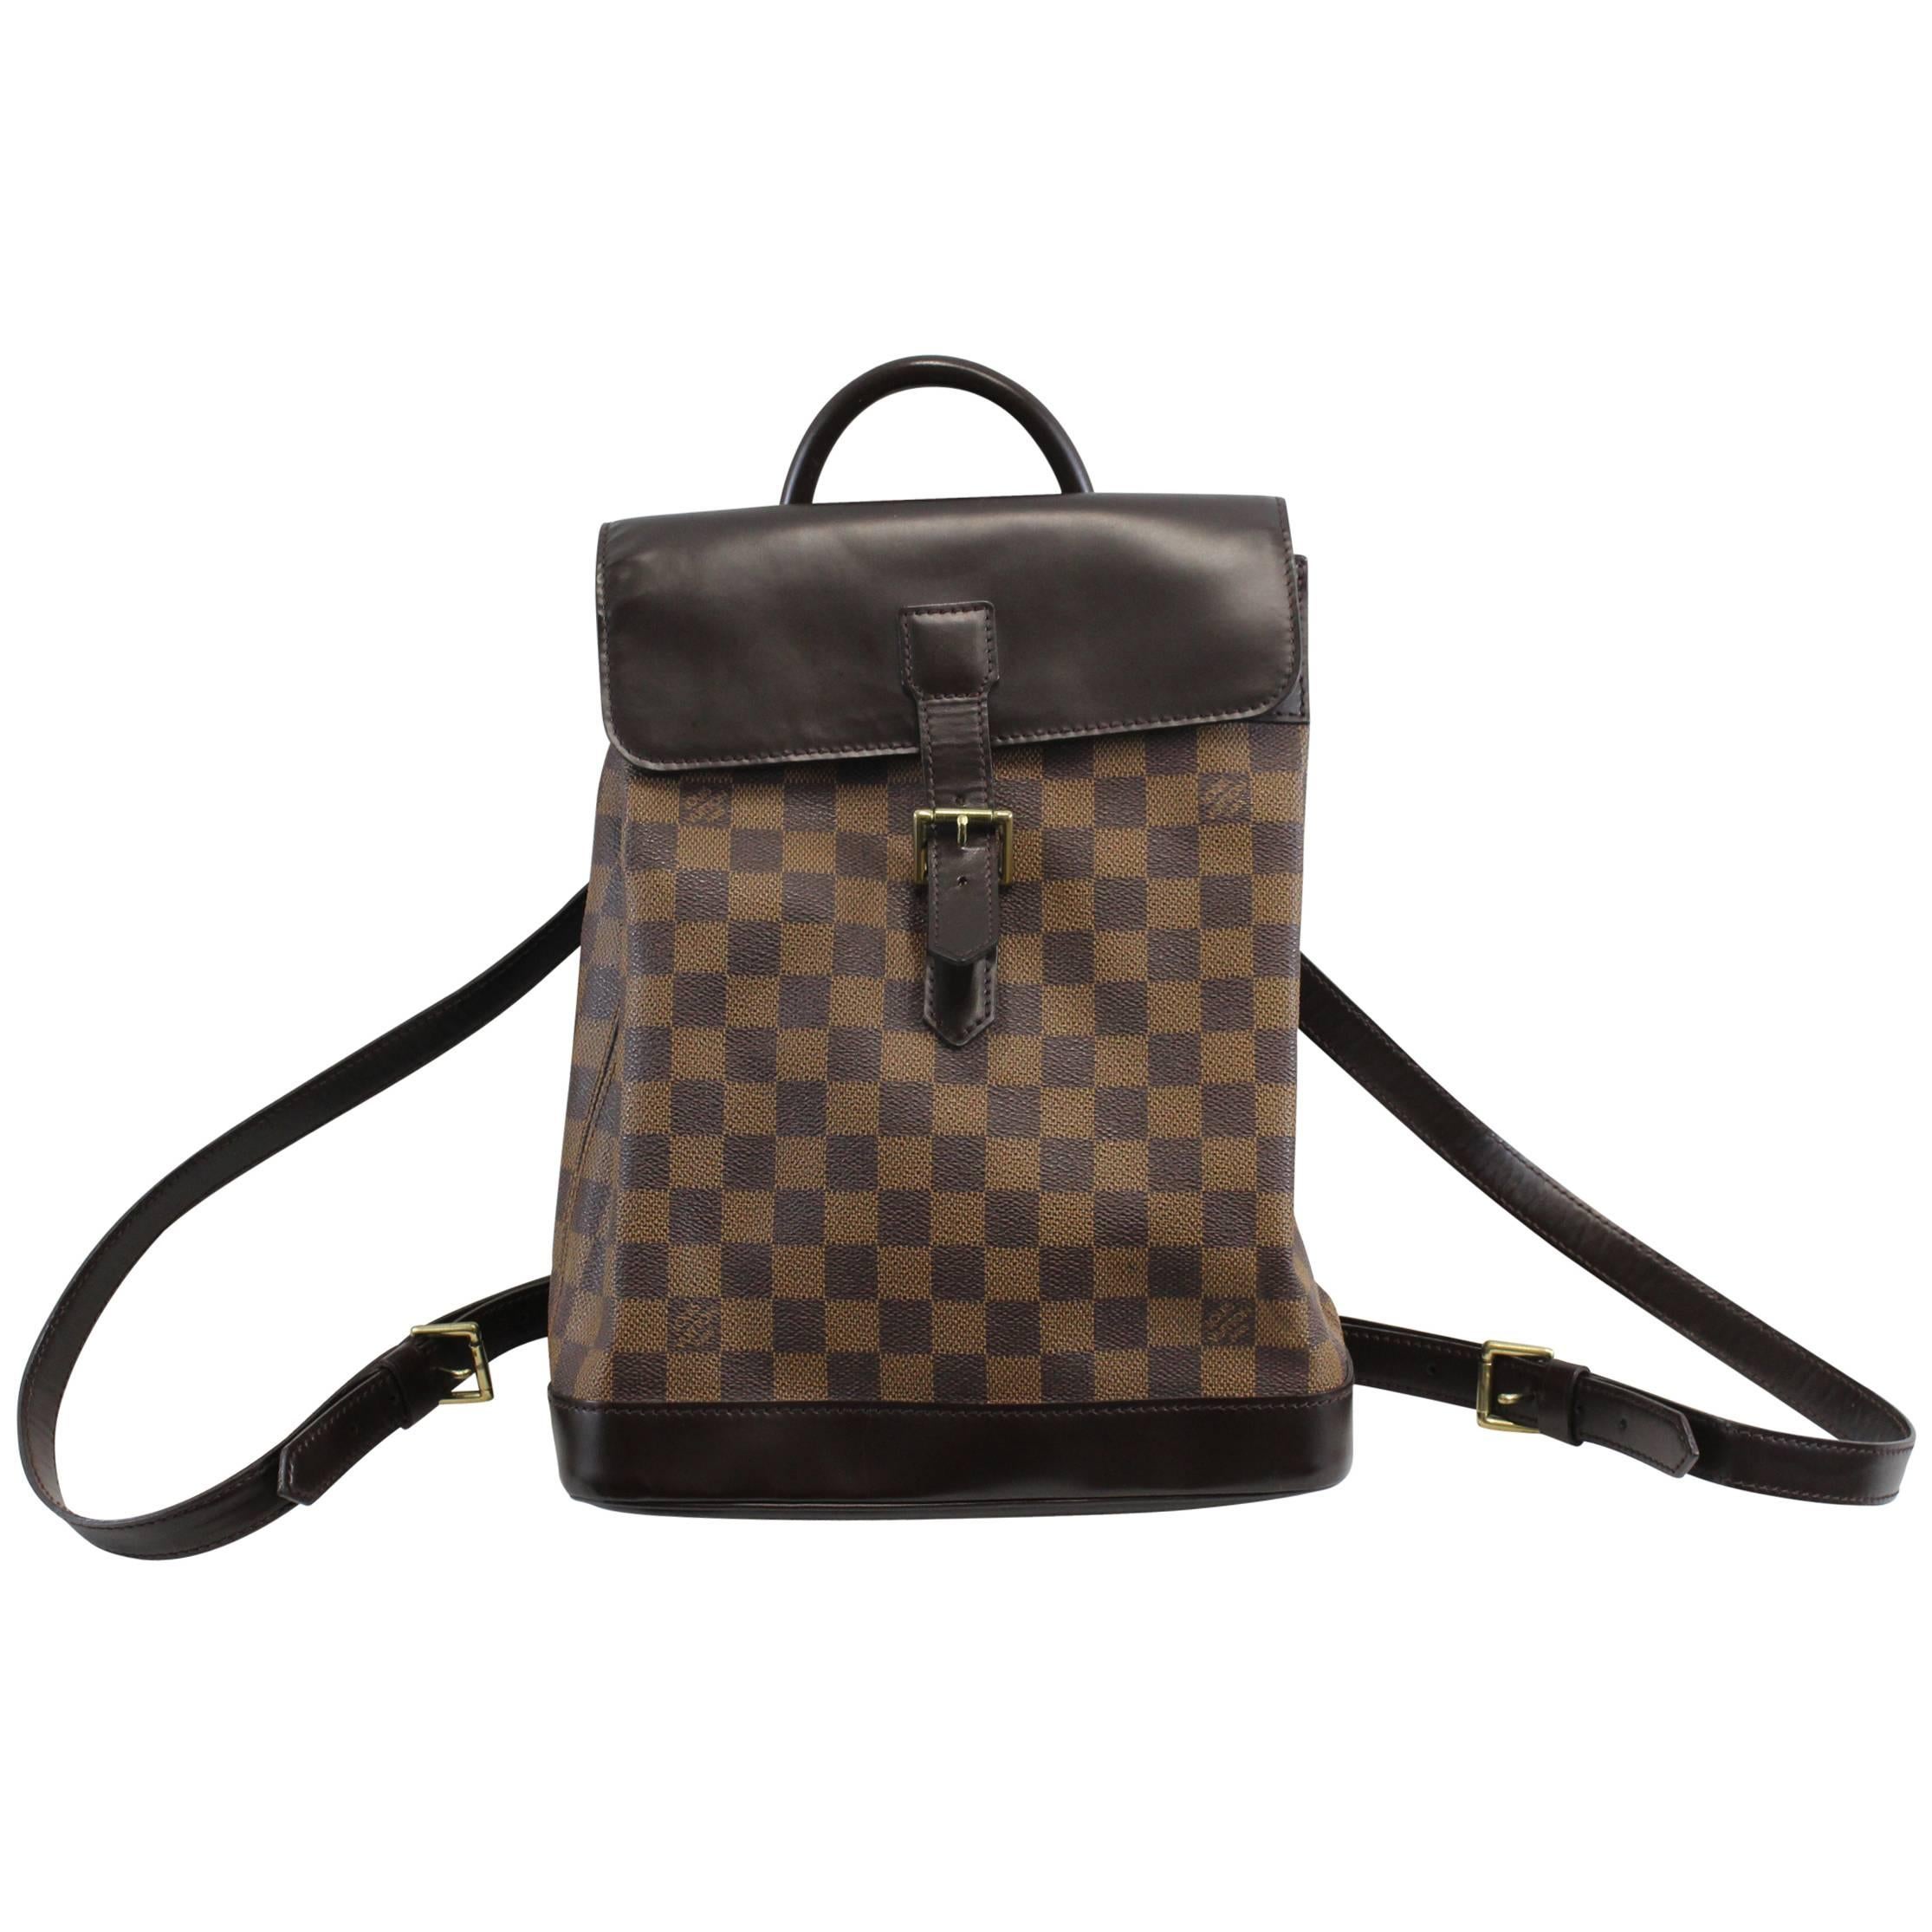 Louis Vuitton Soho Backpack in damier Ebene Canvas and brown Leather